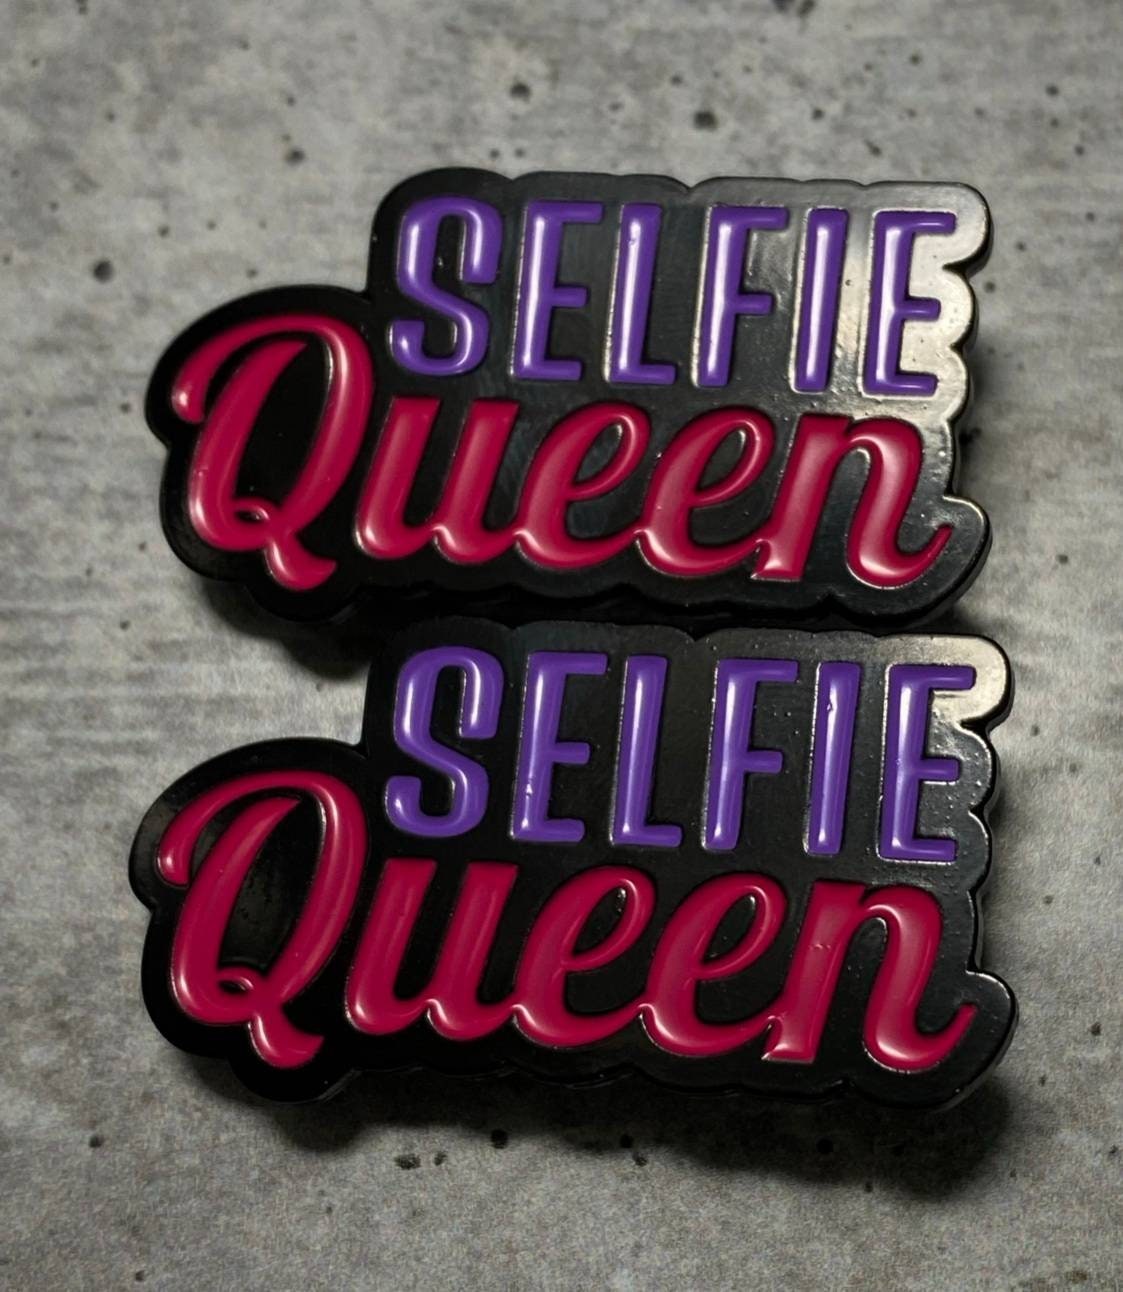 New, Enamel Pin "SELFIE Queen" Purple & Pink, Exclusive Lapel Pin, Size 1.77 inches, w/Butterfly Clutch, Cool Pin For Apparel